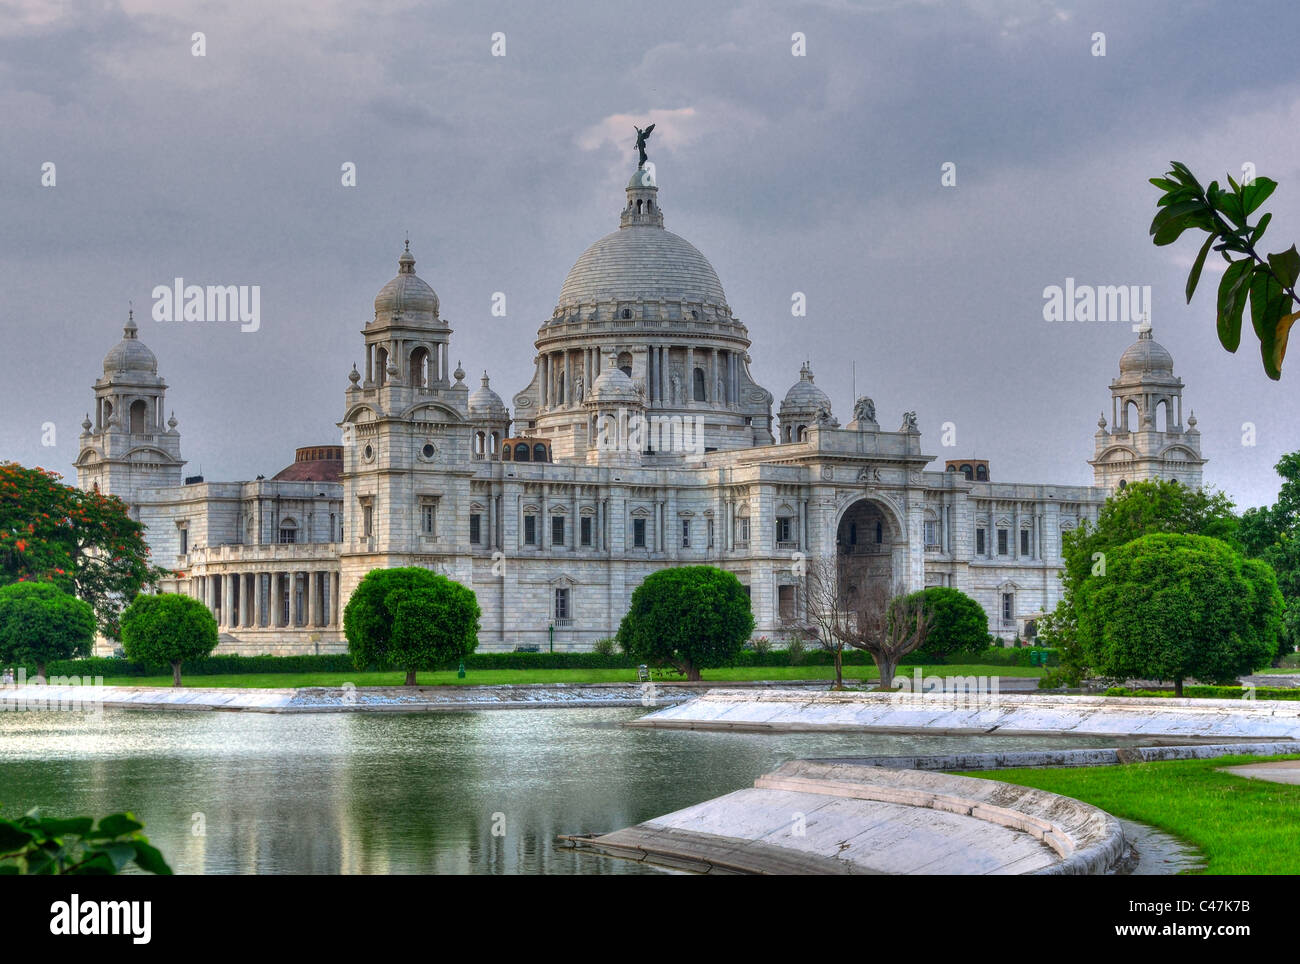 Victoria Memorial Hall, Calcutta, Kolkata in evening light showing Queen's Garden in foreground with green grass, trees and pond Stock Photo